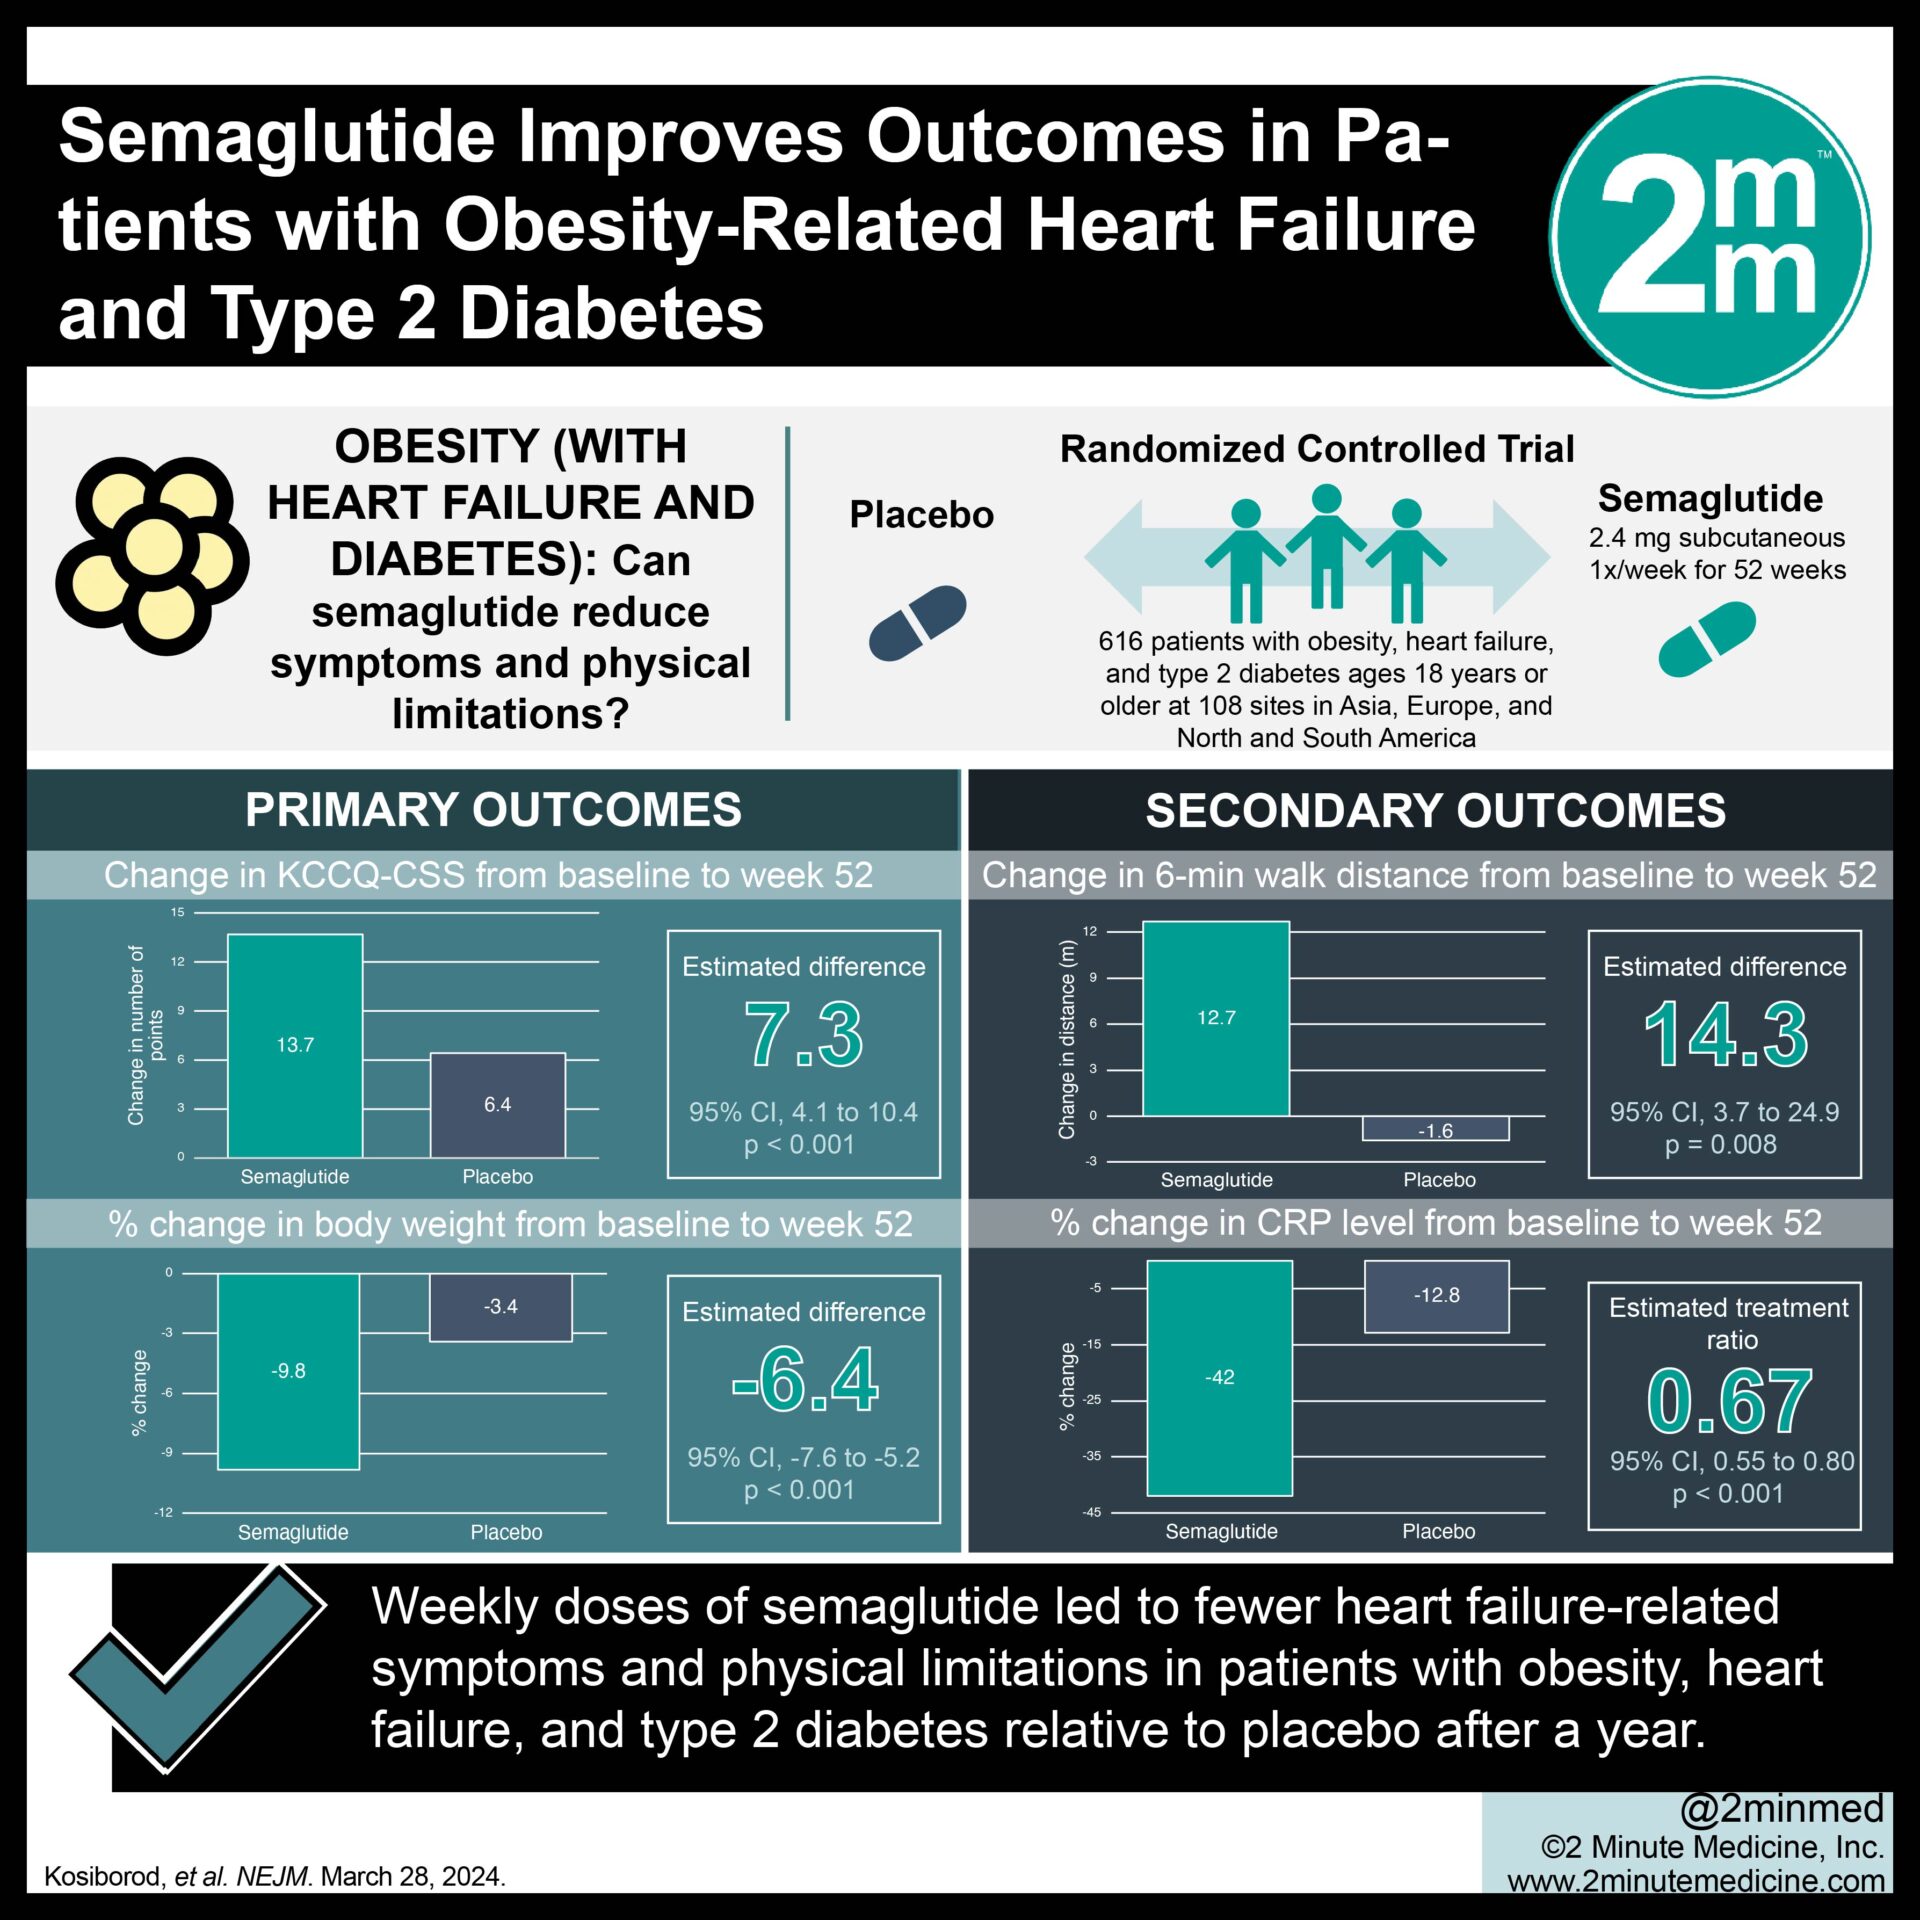 #VisualAbstract: Semaglutide Improves Outcomes in Patients with Obesity-Related Heart Failure and Type 2 Diabetes